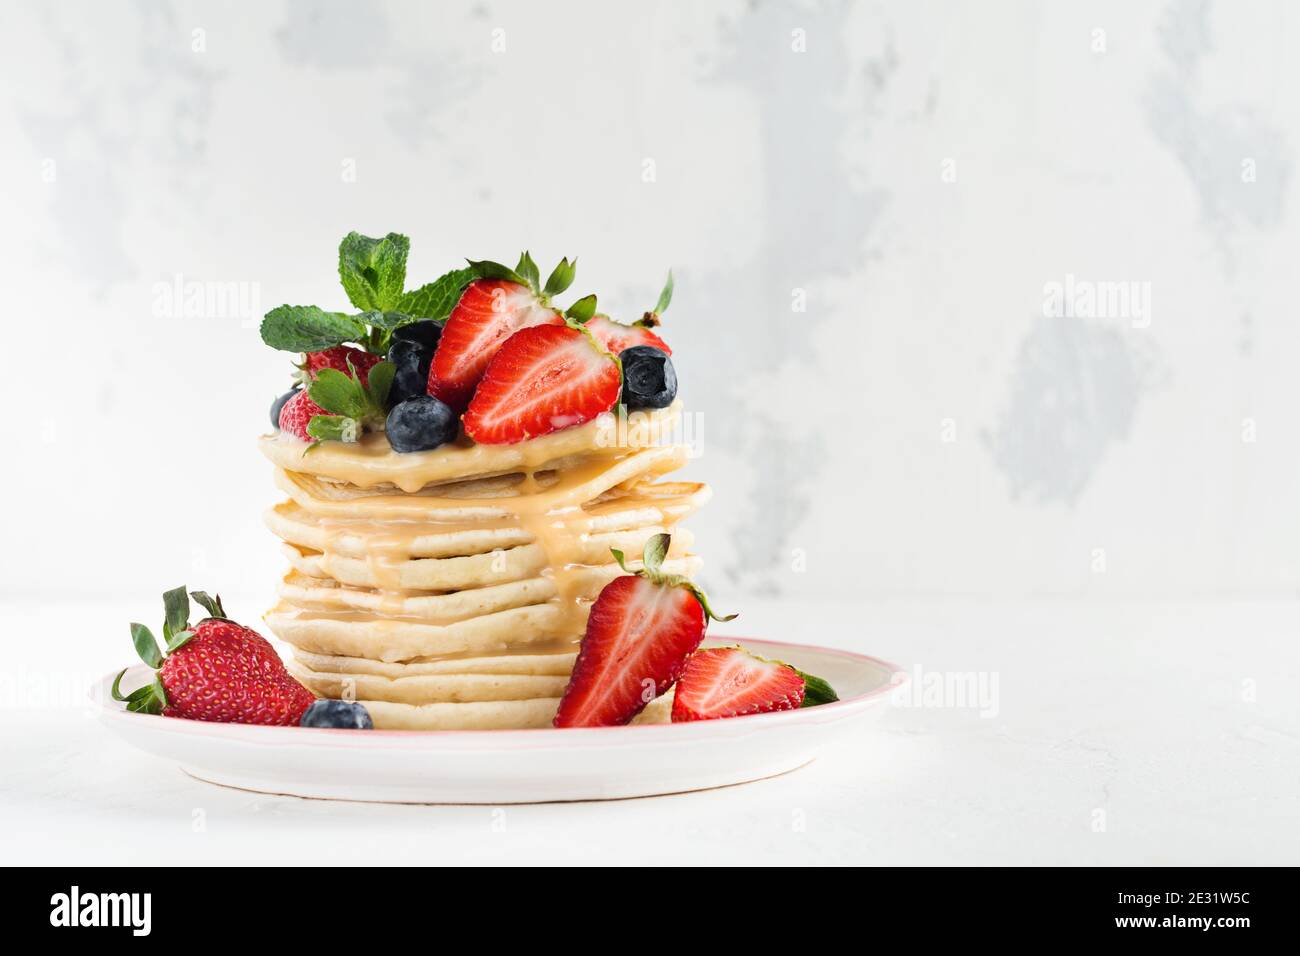 Stack of homemade little pancakes with honey, fresh strawberries and sauce on light wooden background. Selective focus. Stock Photo